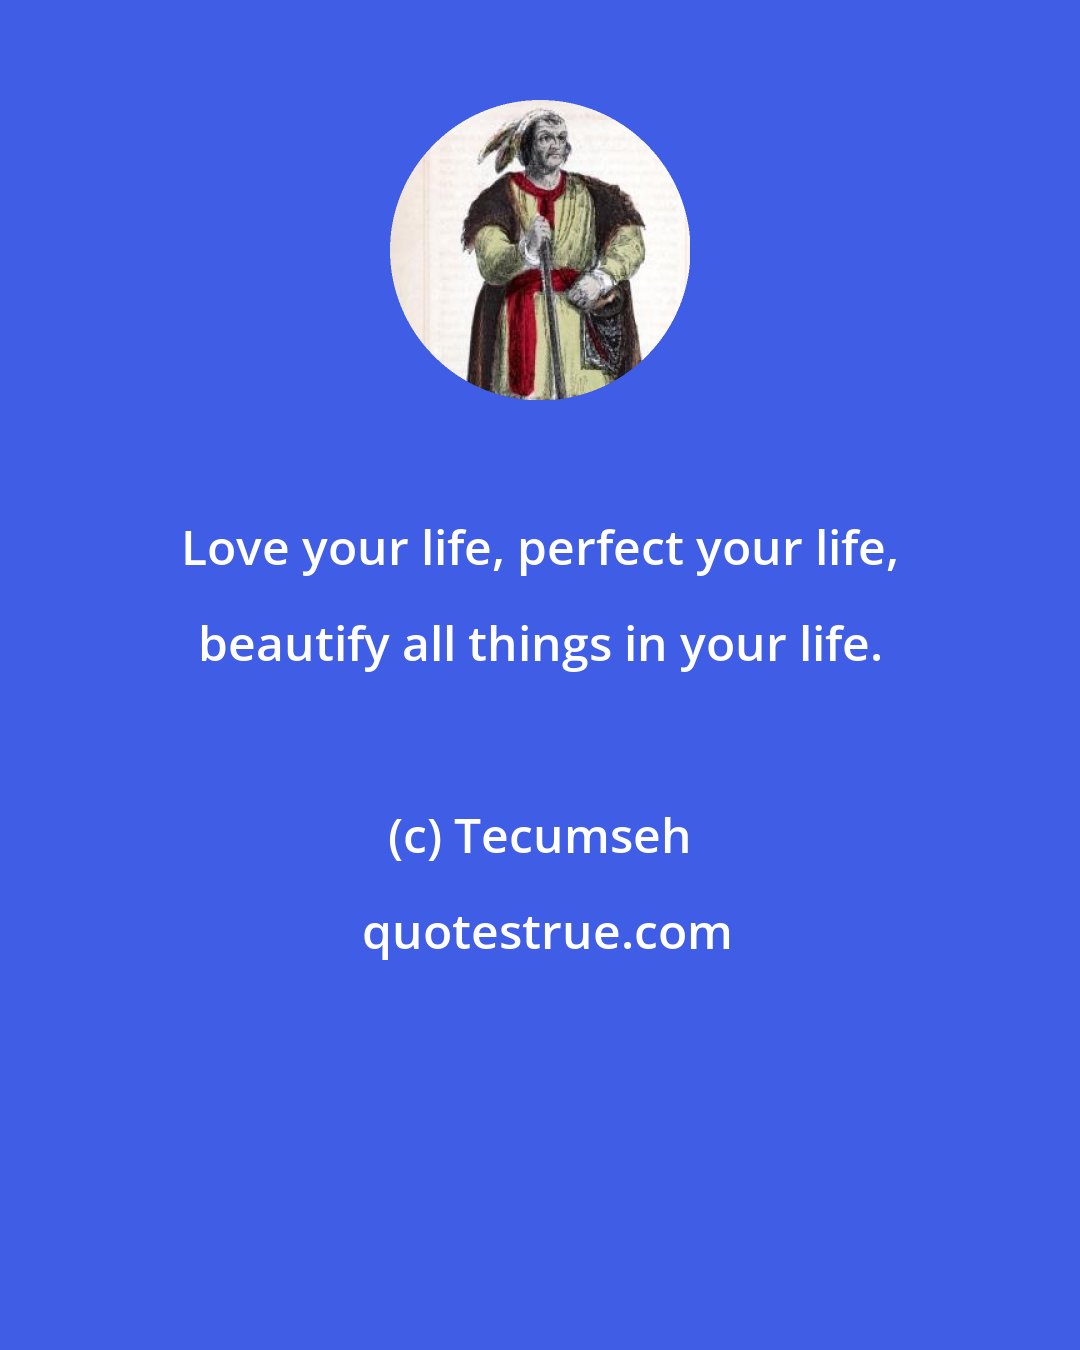 Tecumseh: Love your life, perfect your life, beautify all things in your life.